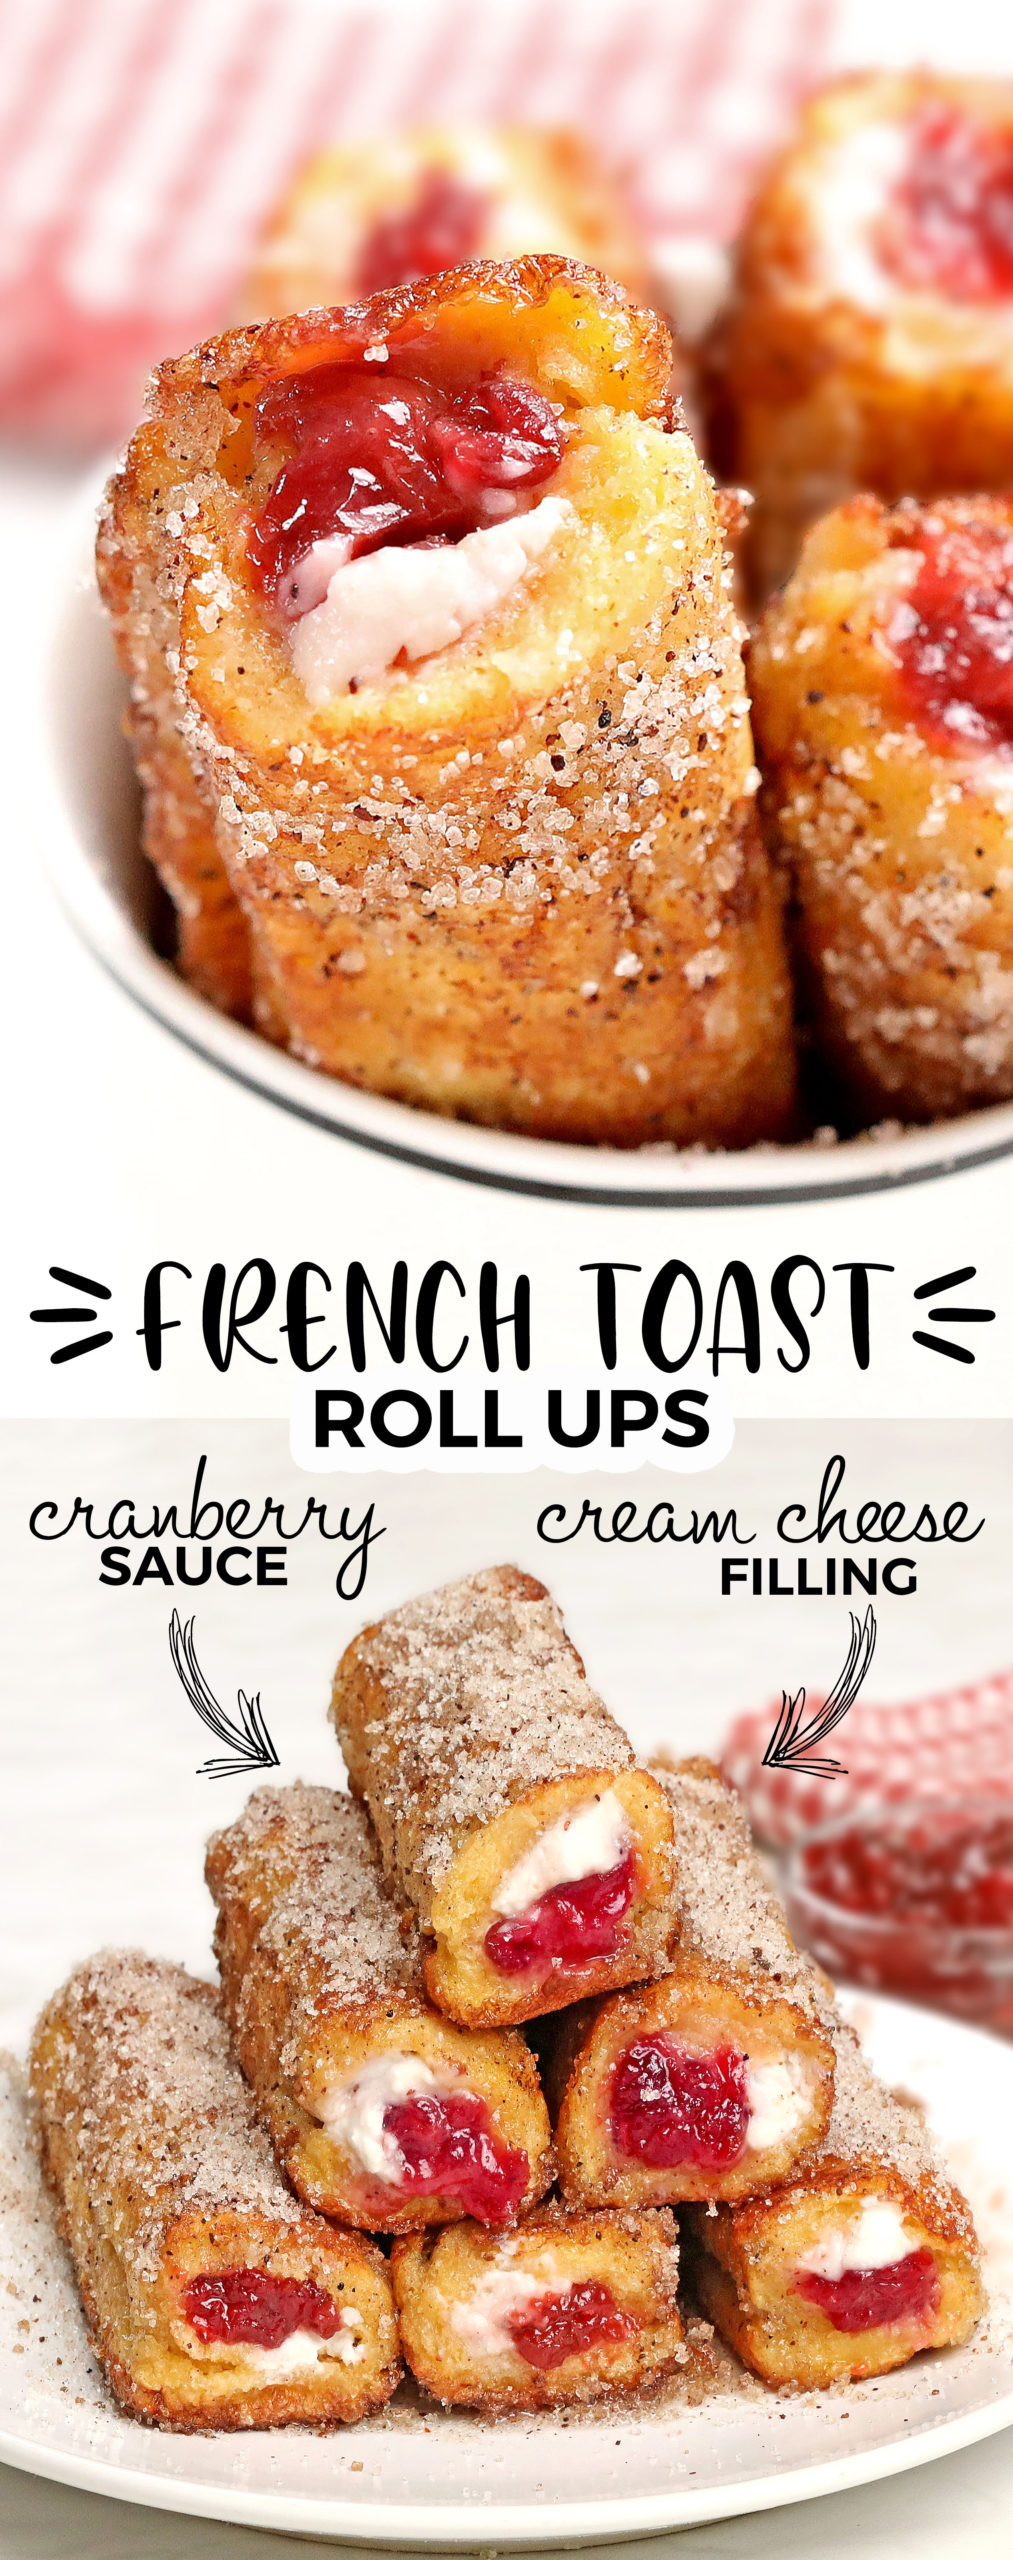 Cranberry French Toast Roll Ups are a creative holiday breakfast, snack or dessert! it’s a great way to use up cranberry sauce leftovers.